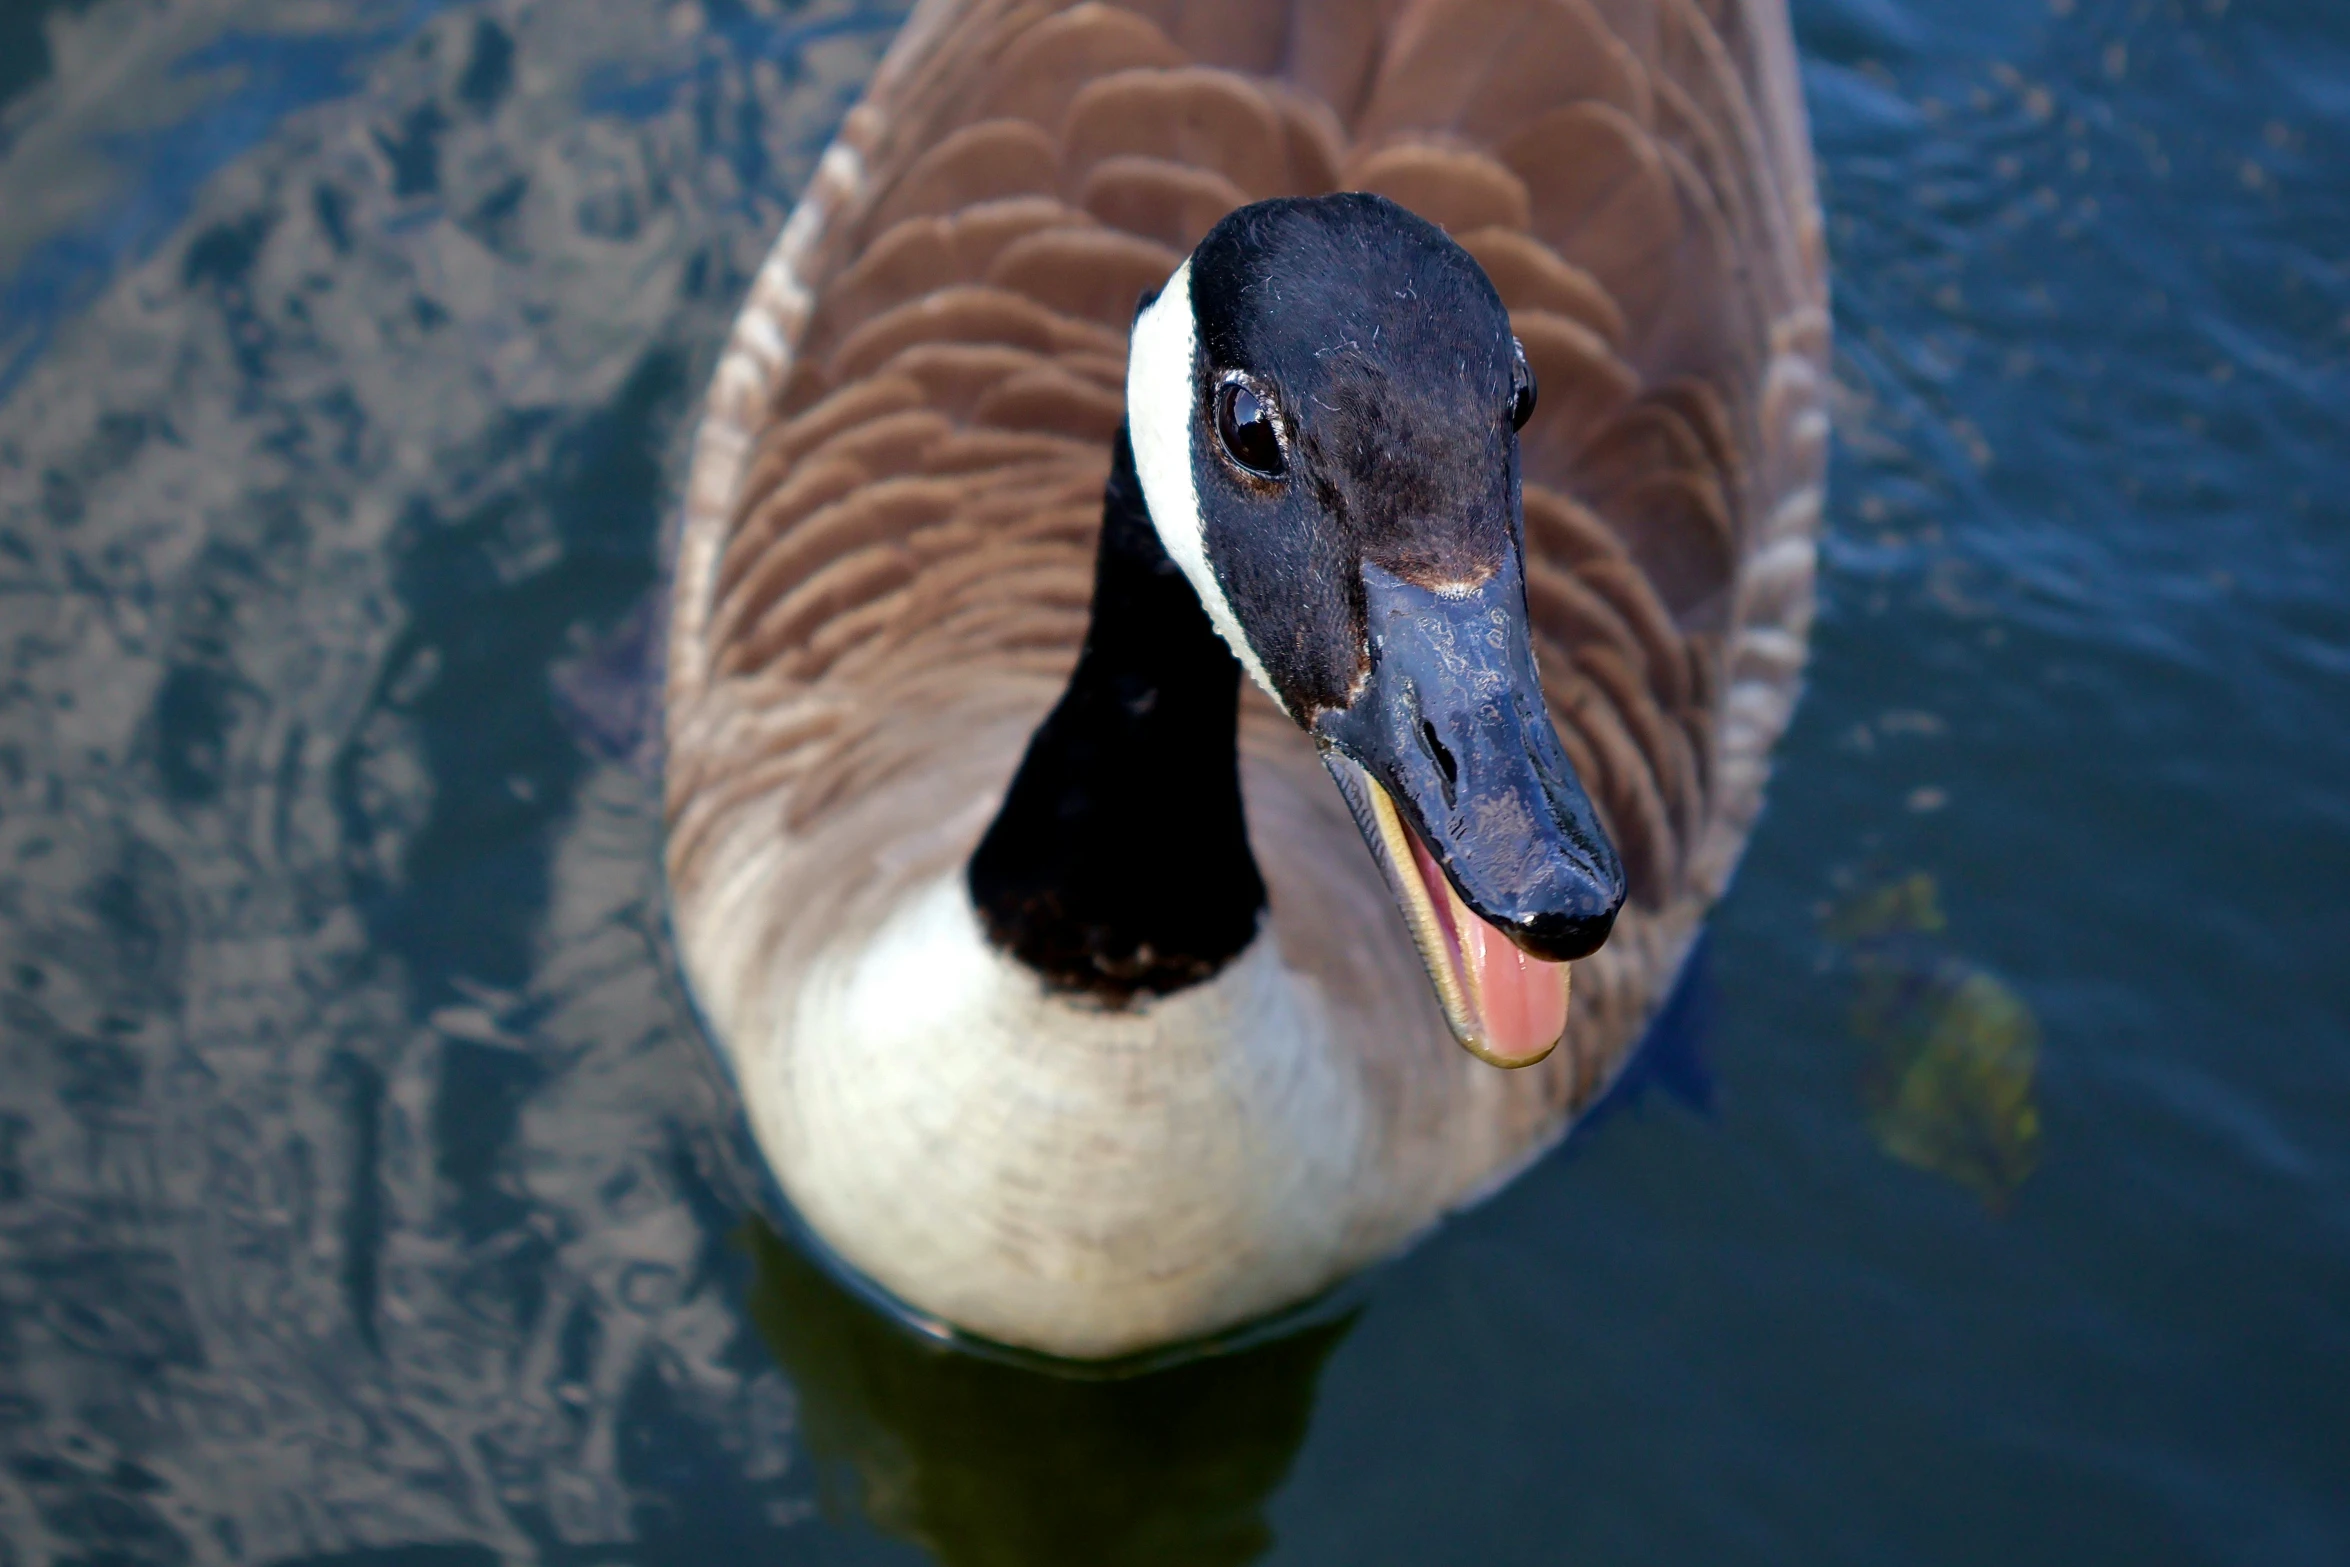 a goose is looking up at the camera